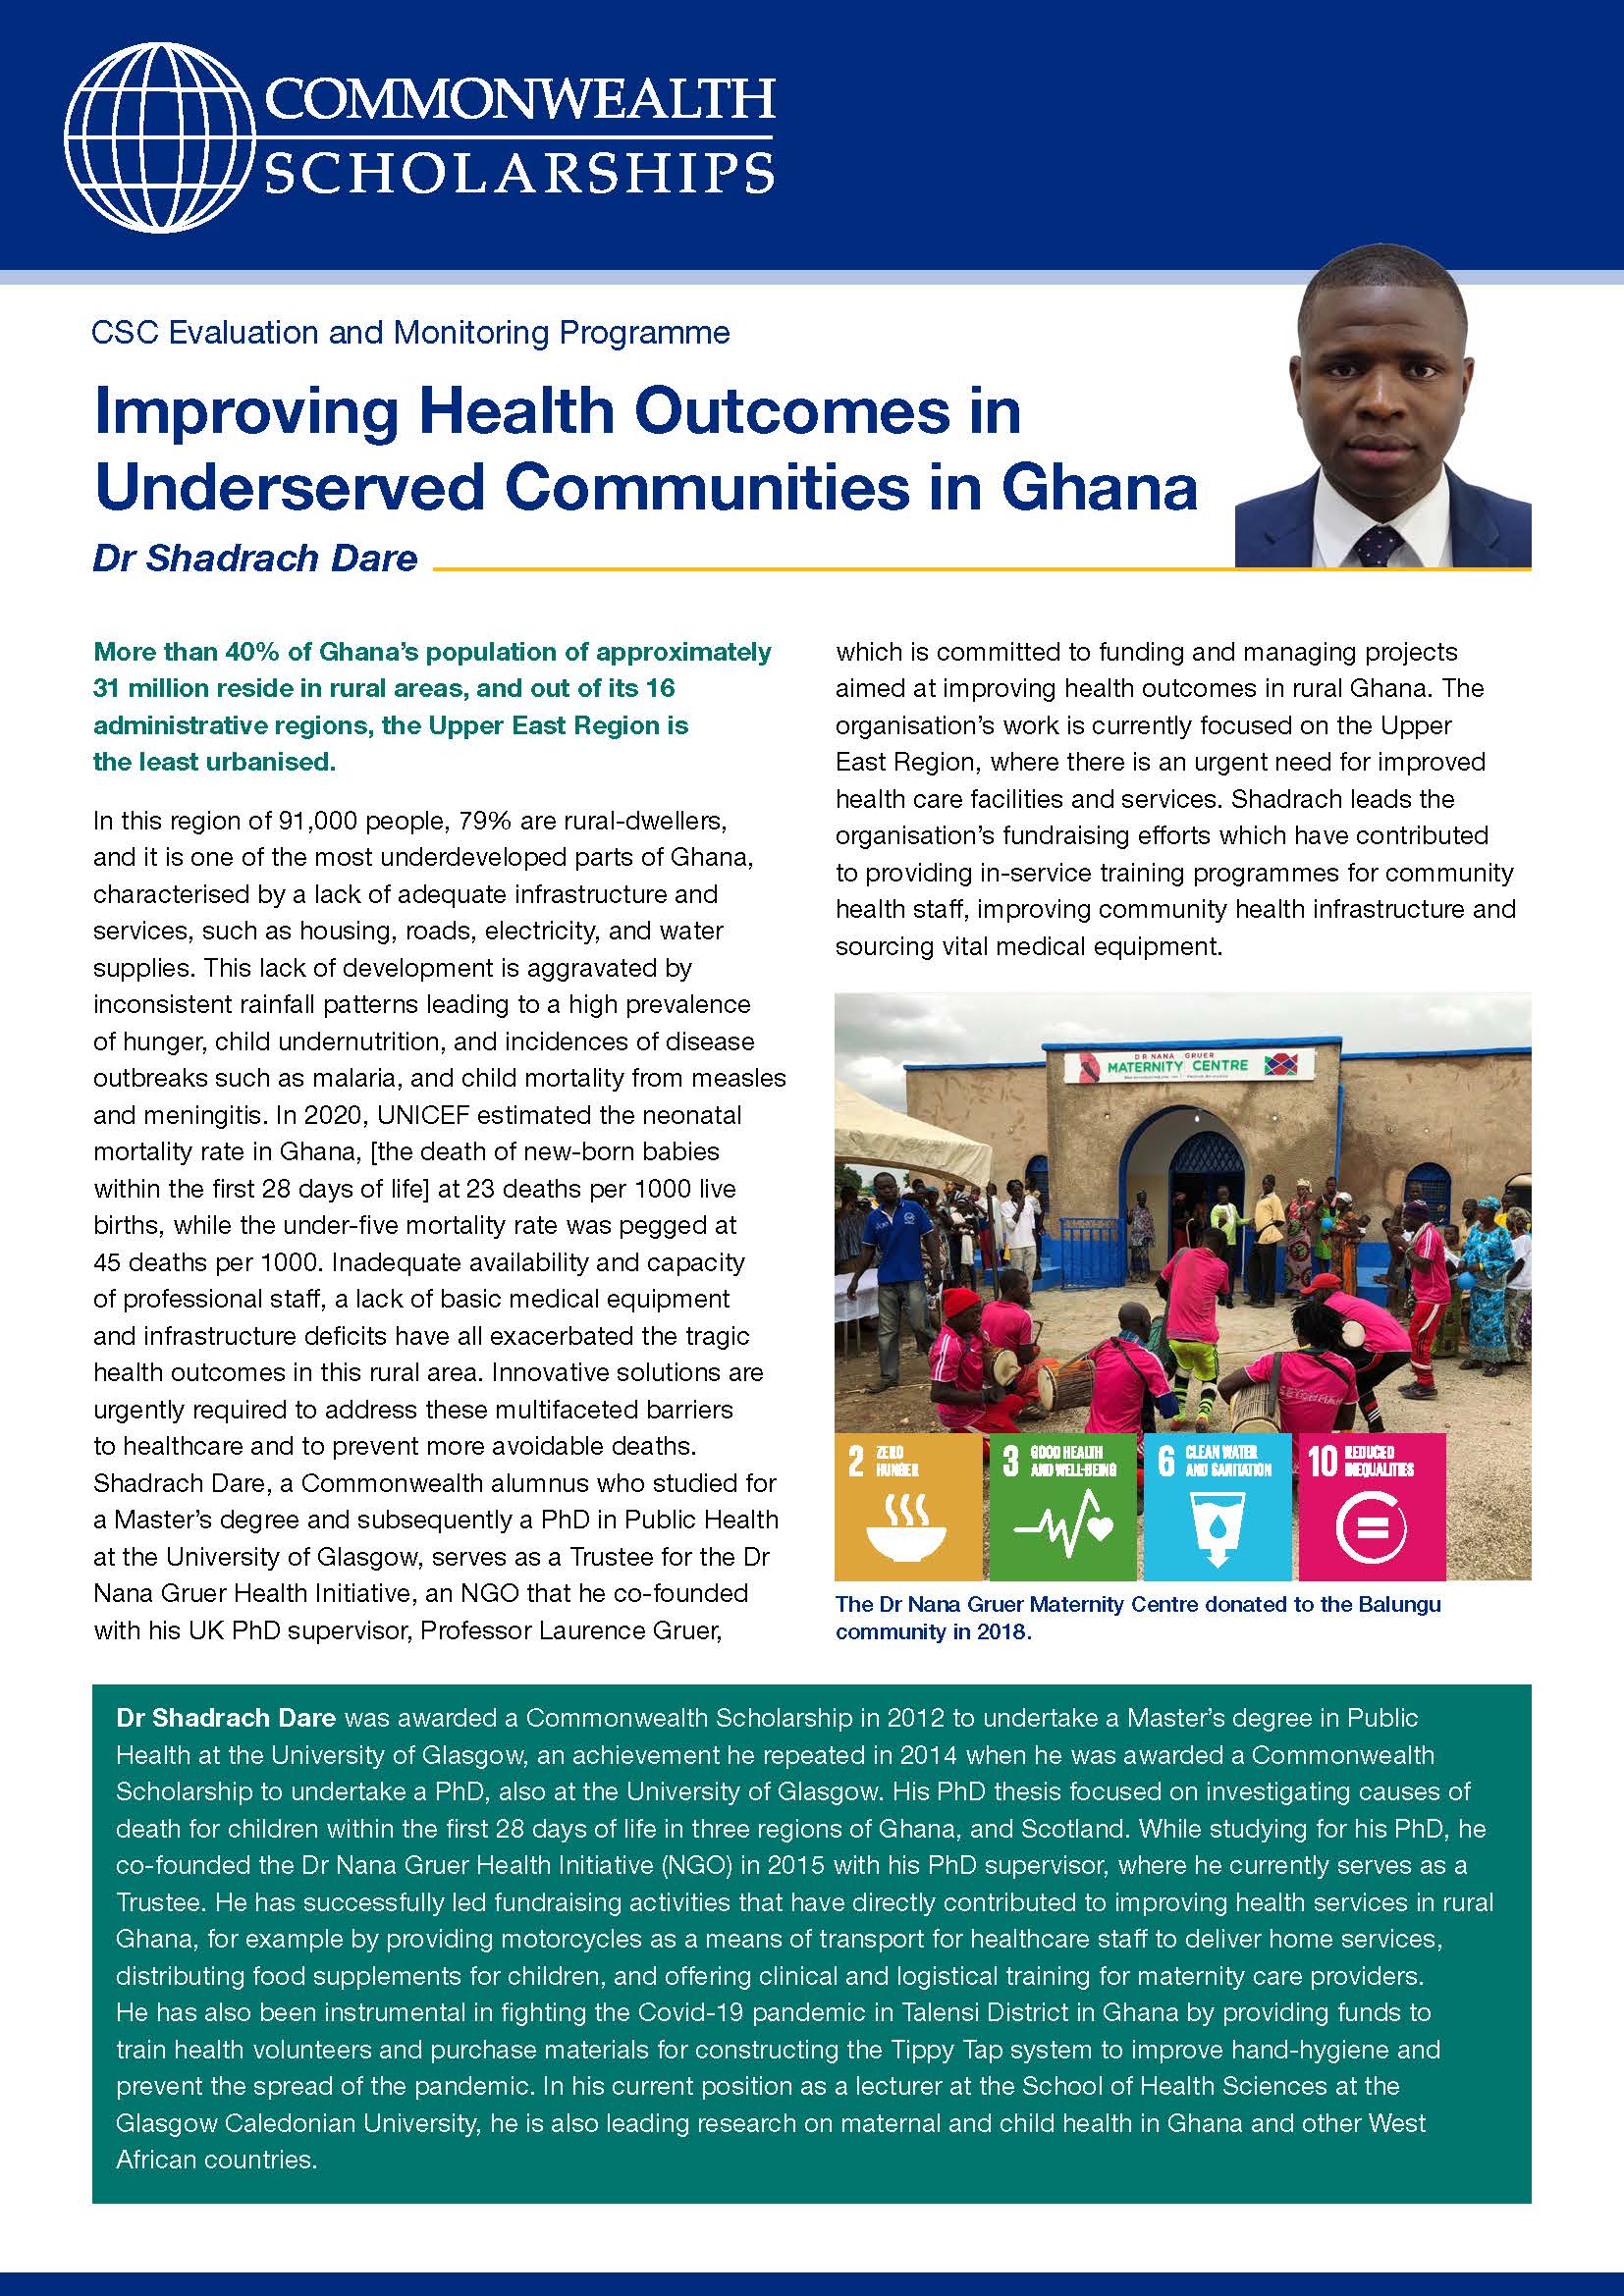 Improving Health Outcomes in Underserved Communities in Ghana Case Study